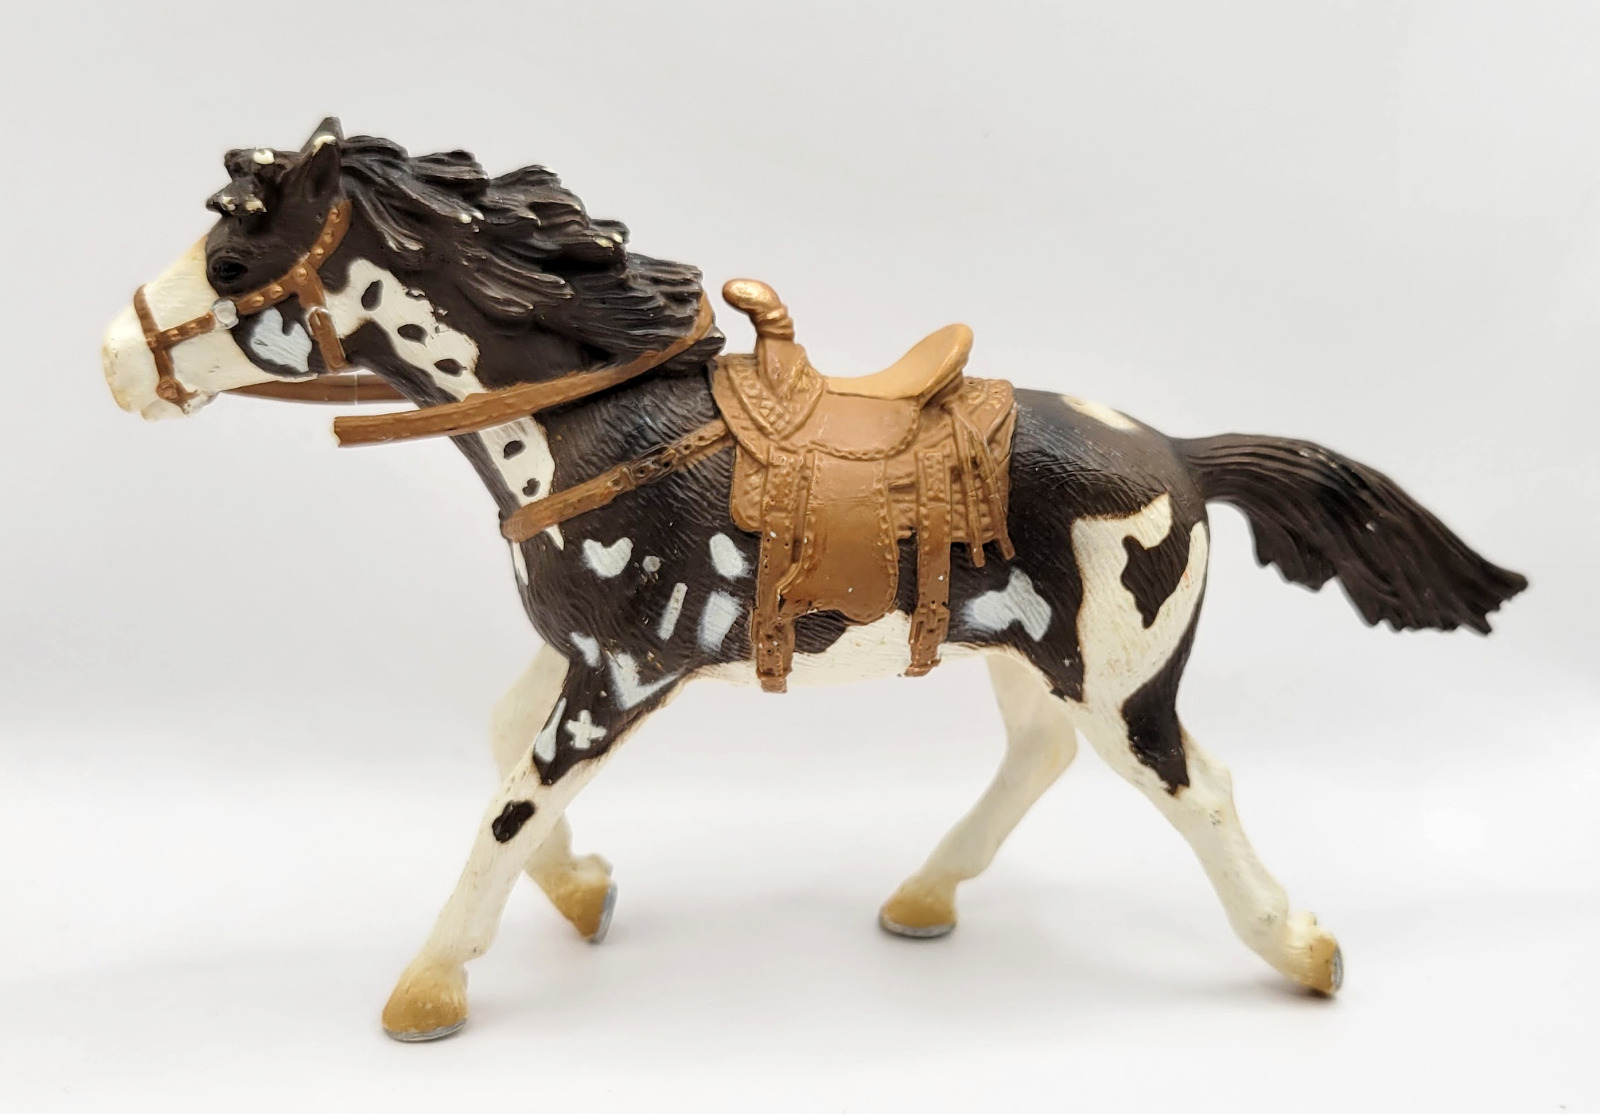 Schleich Germany 2005 Spotted Brown and White Horse Figurine Figure - Damaged